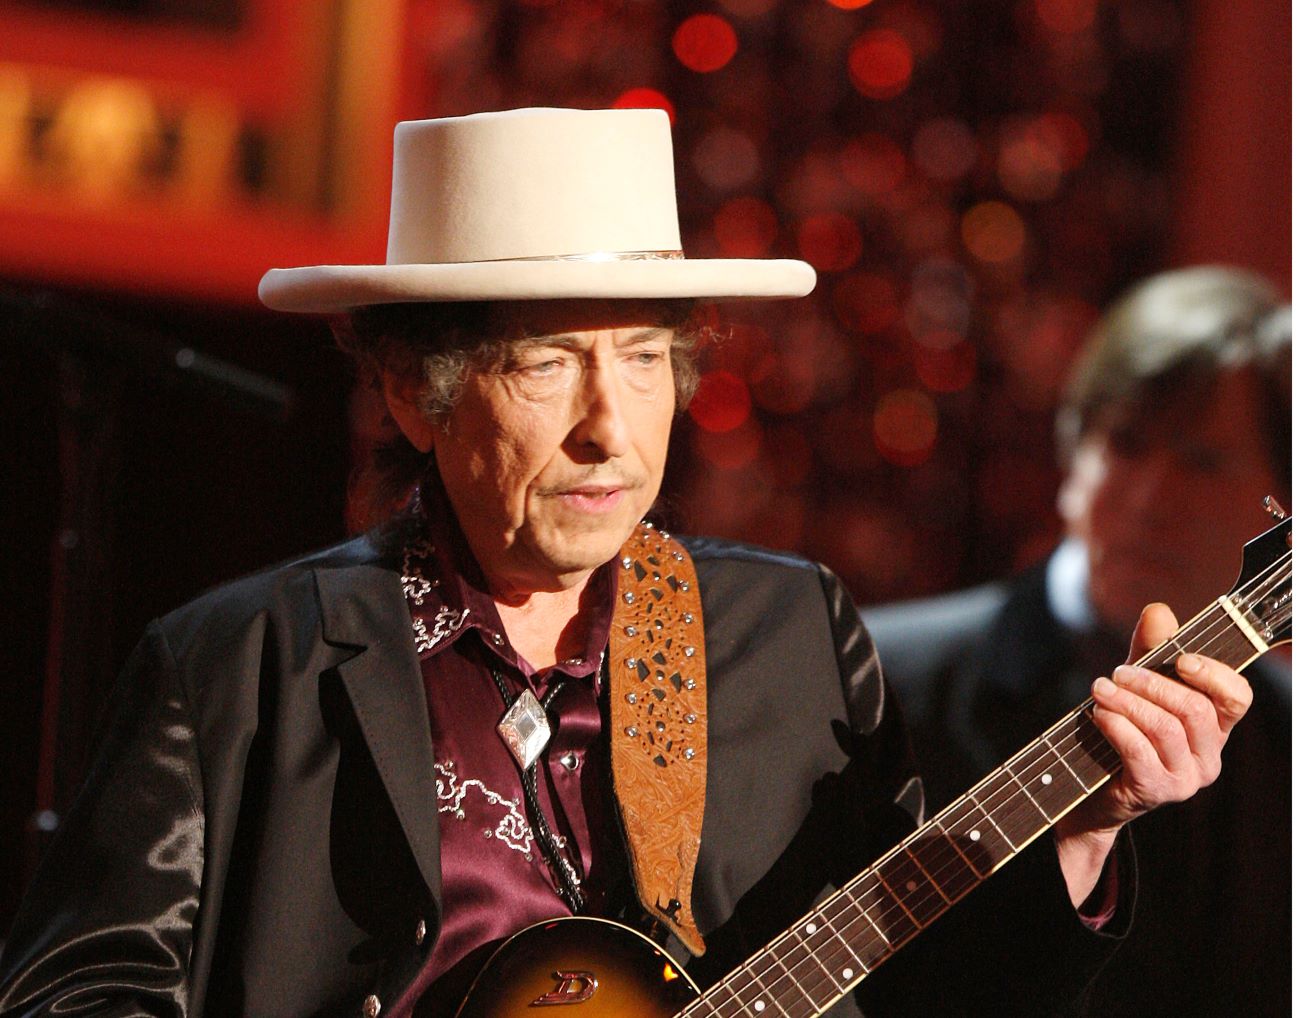 Bob Dylan plays guitar and wears a white hat.